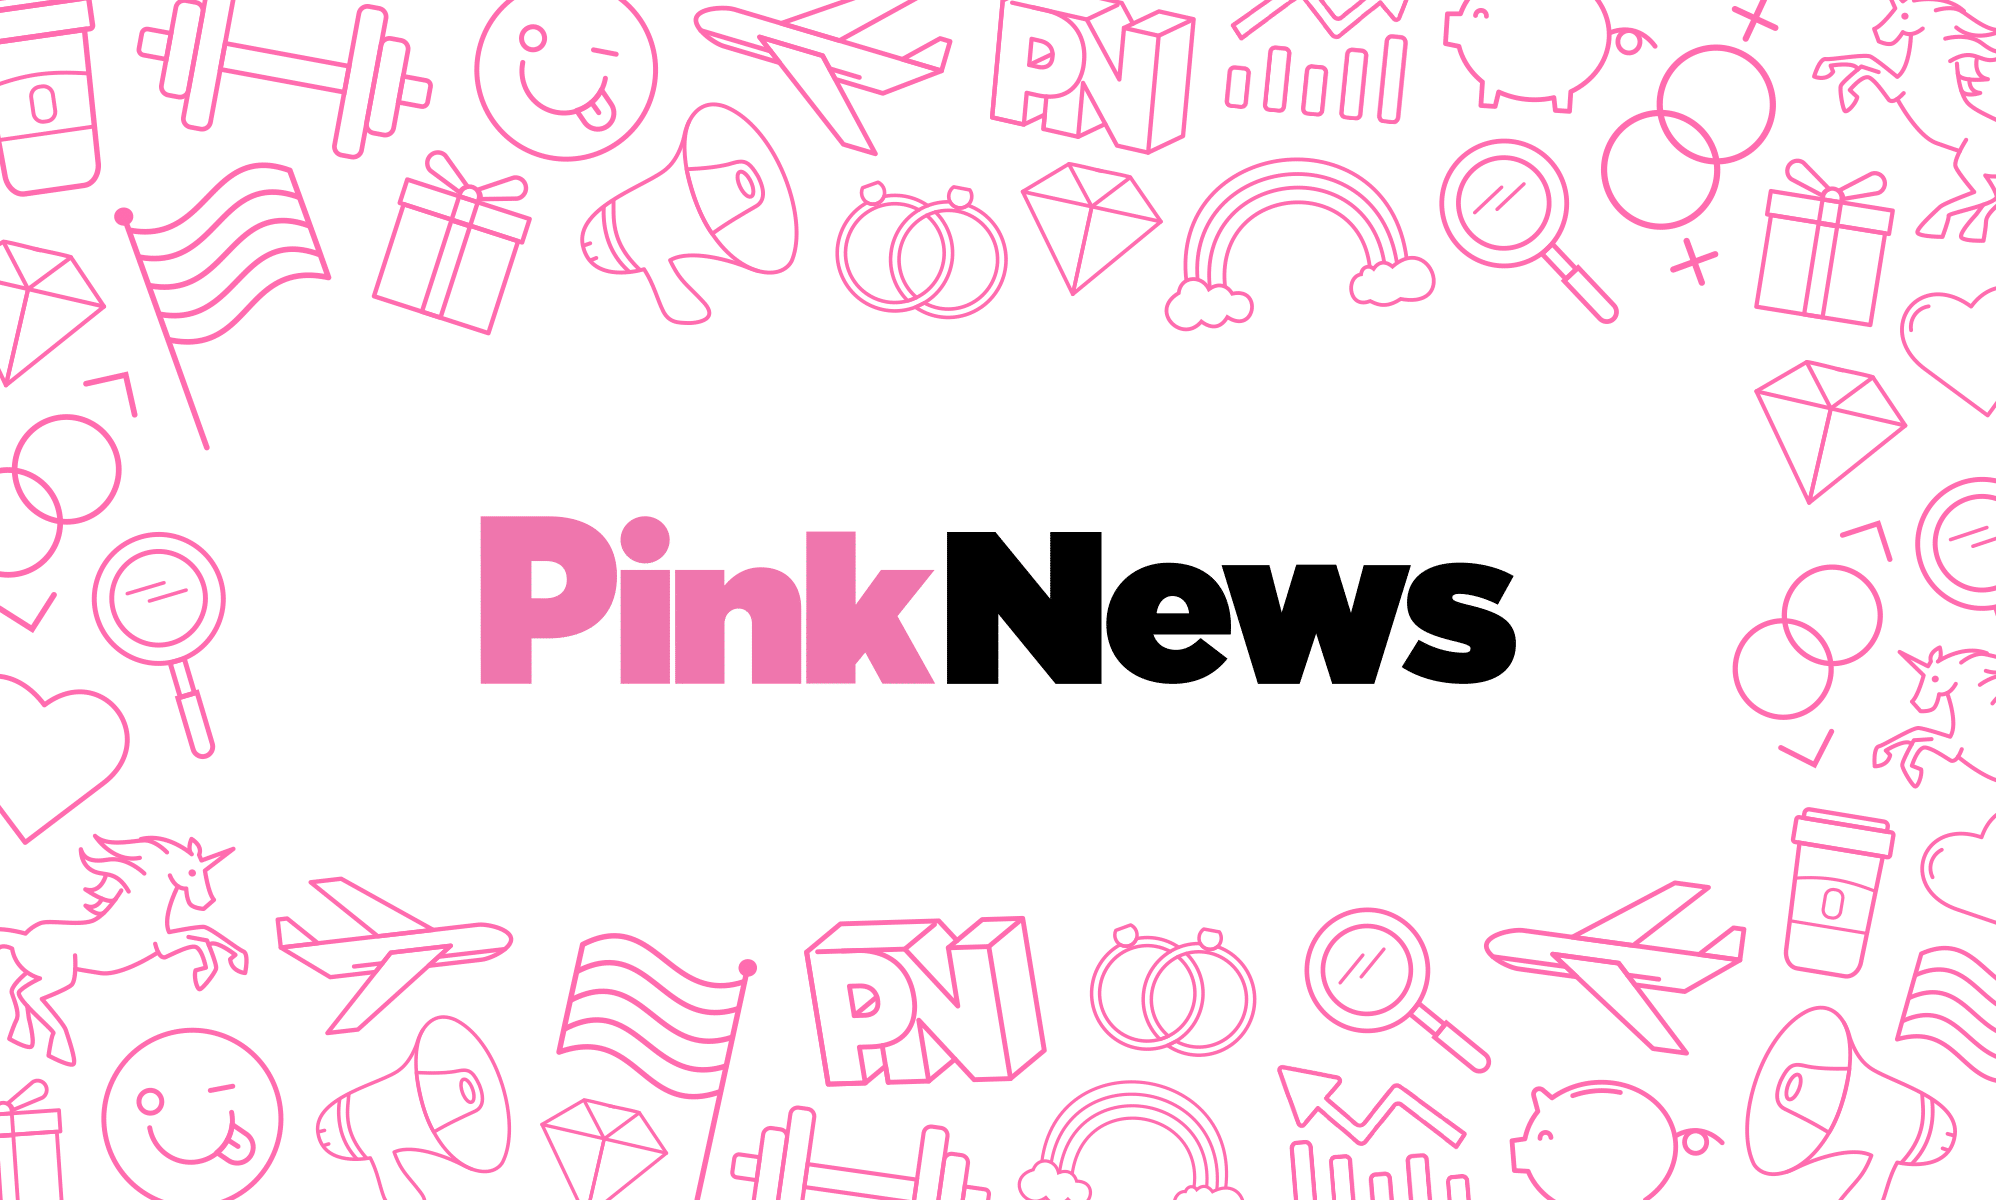 Here are all the winners from the PinkNews Awards